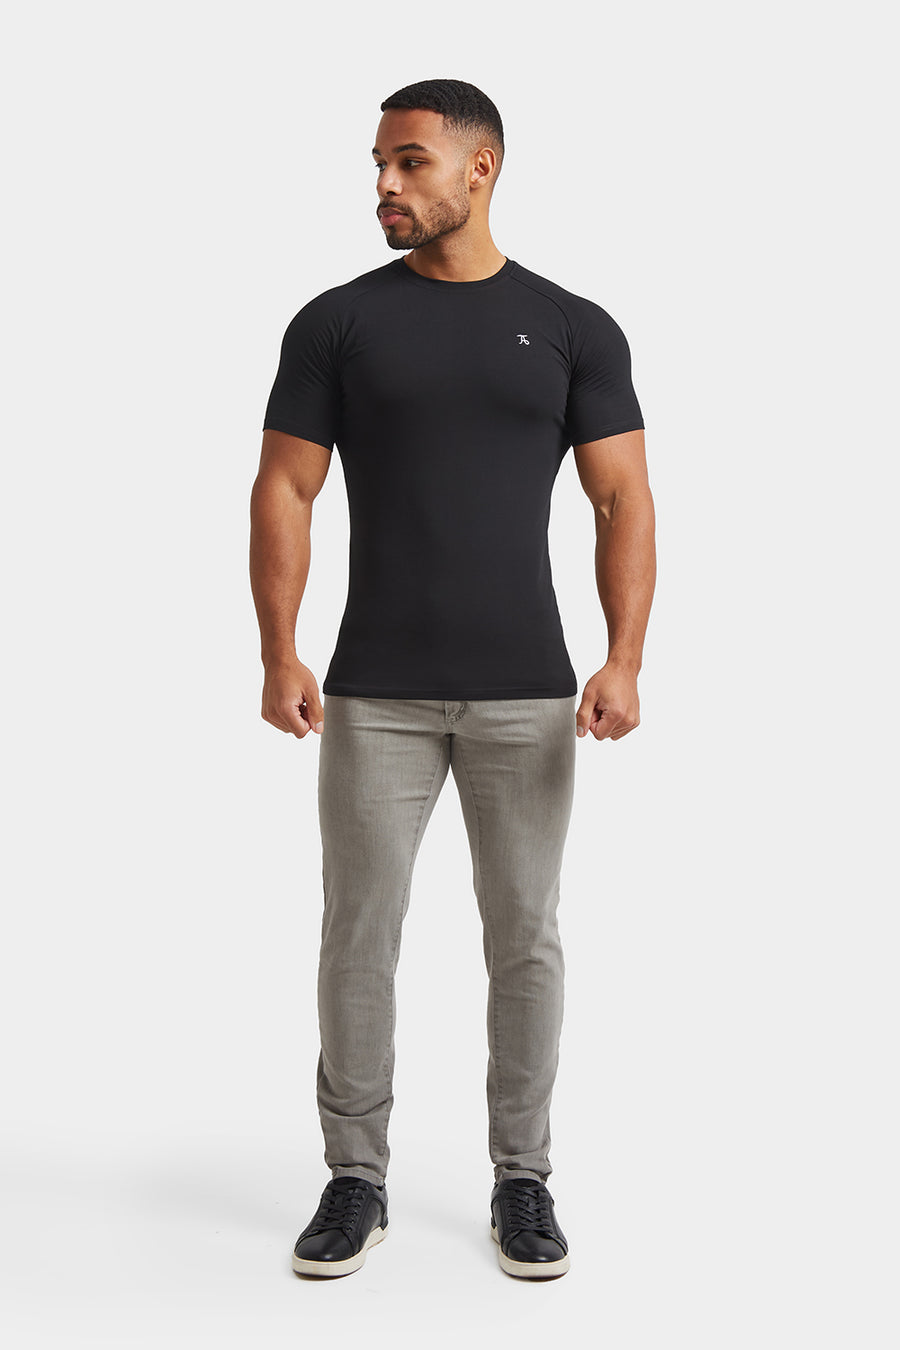 Athletic Fit Jeans in Indigo - TAILORED ATHLETE - USA